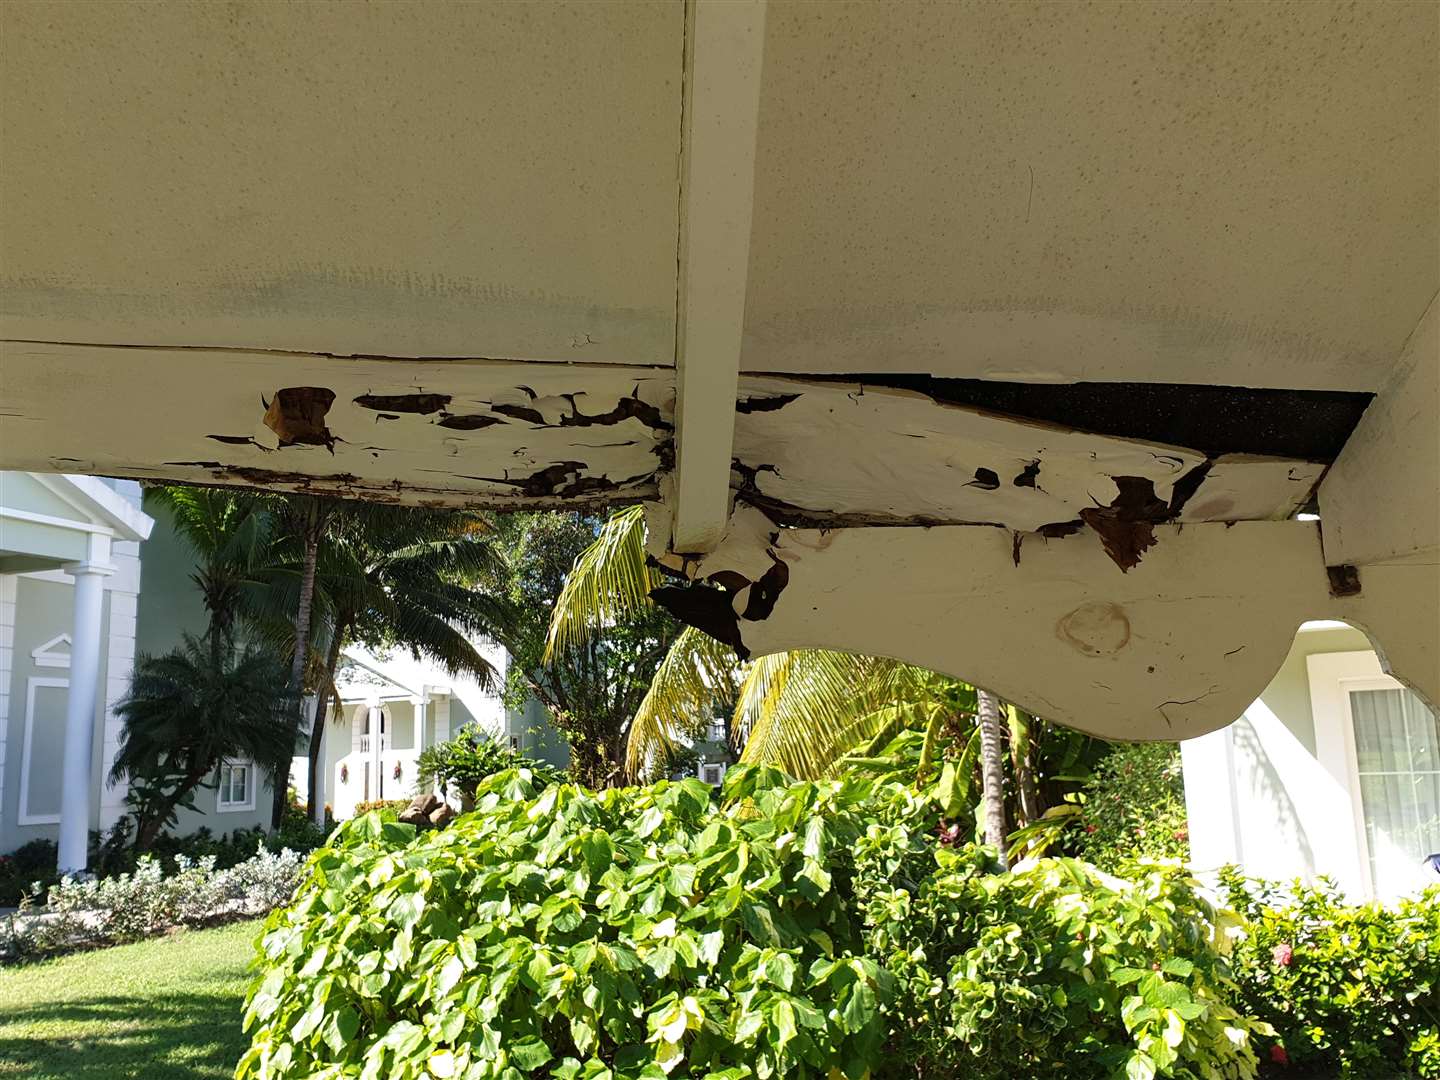 Photos suggest parts of the resort were in a poor state of repair. Pic: Karl Lewis-Law